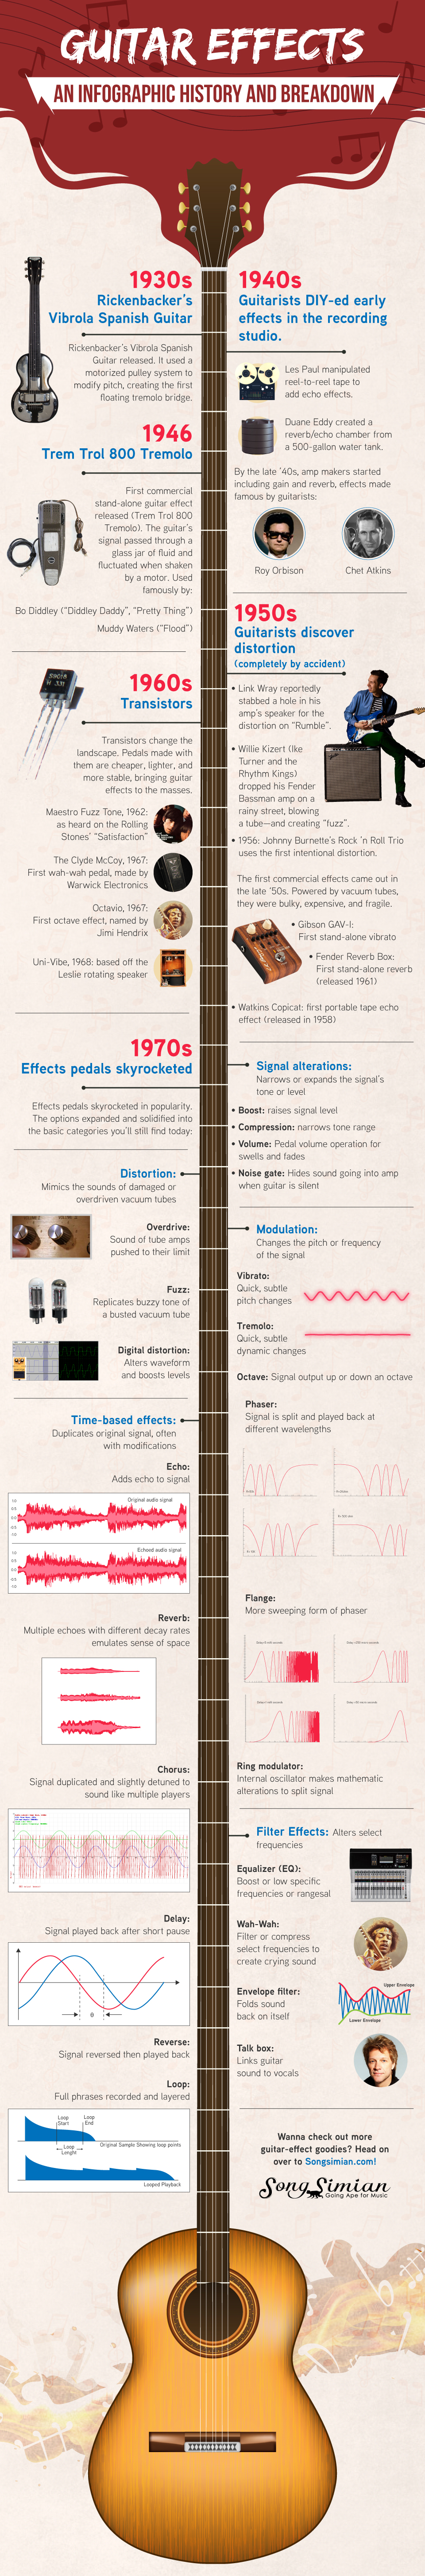 Guitar Effects Infographic History